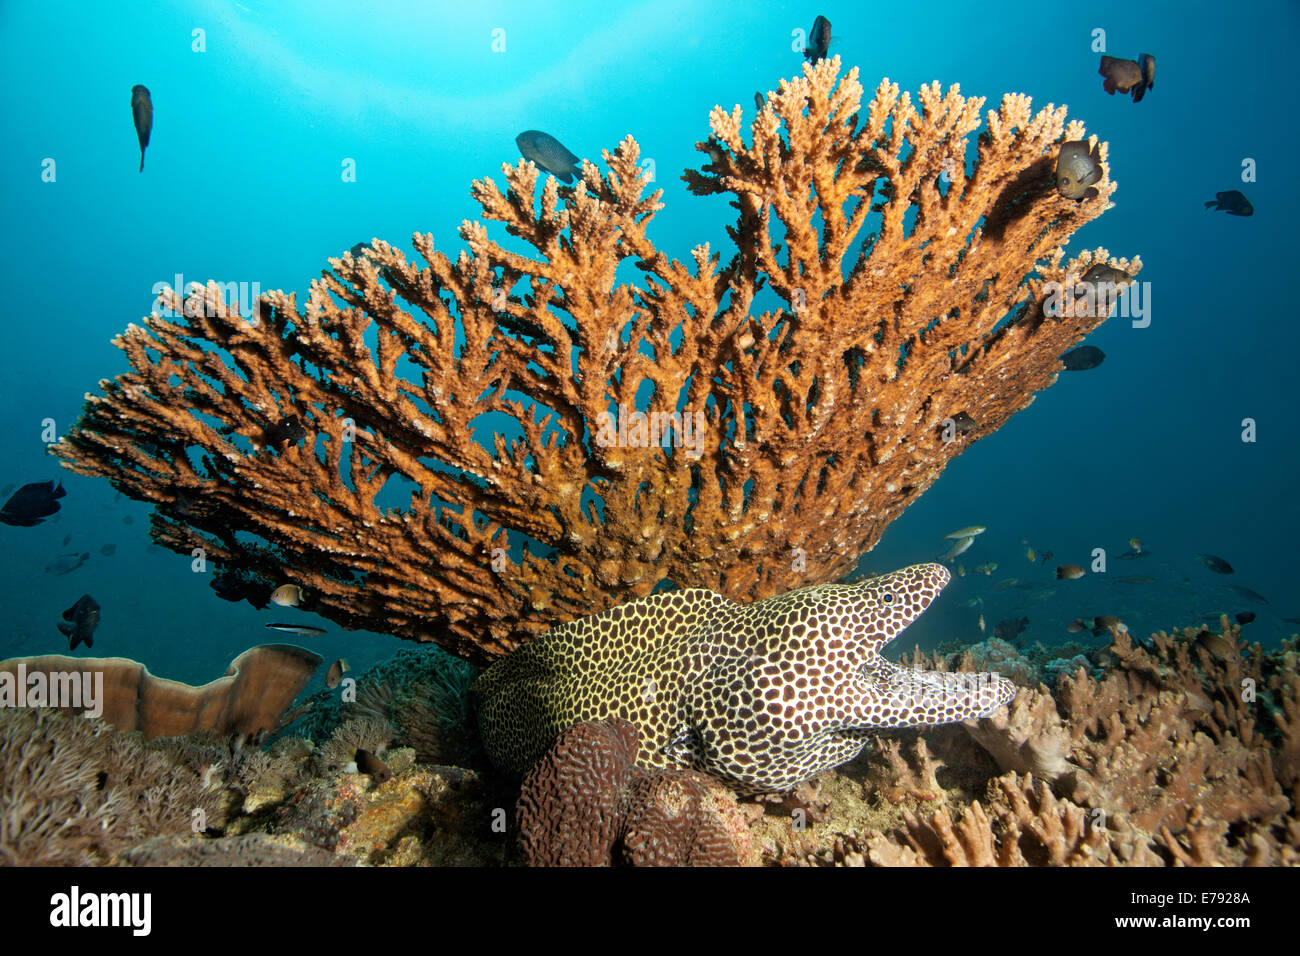 Laced Moray (Gymnothorax favagineus) with its mouth wide open sitting beneath Acropora corals (Acropora sp.) Stock Photo